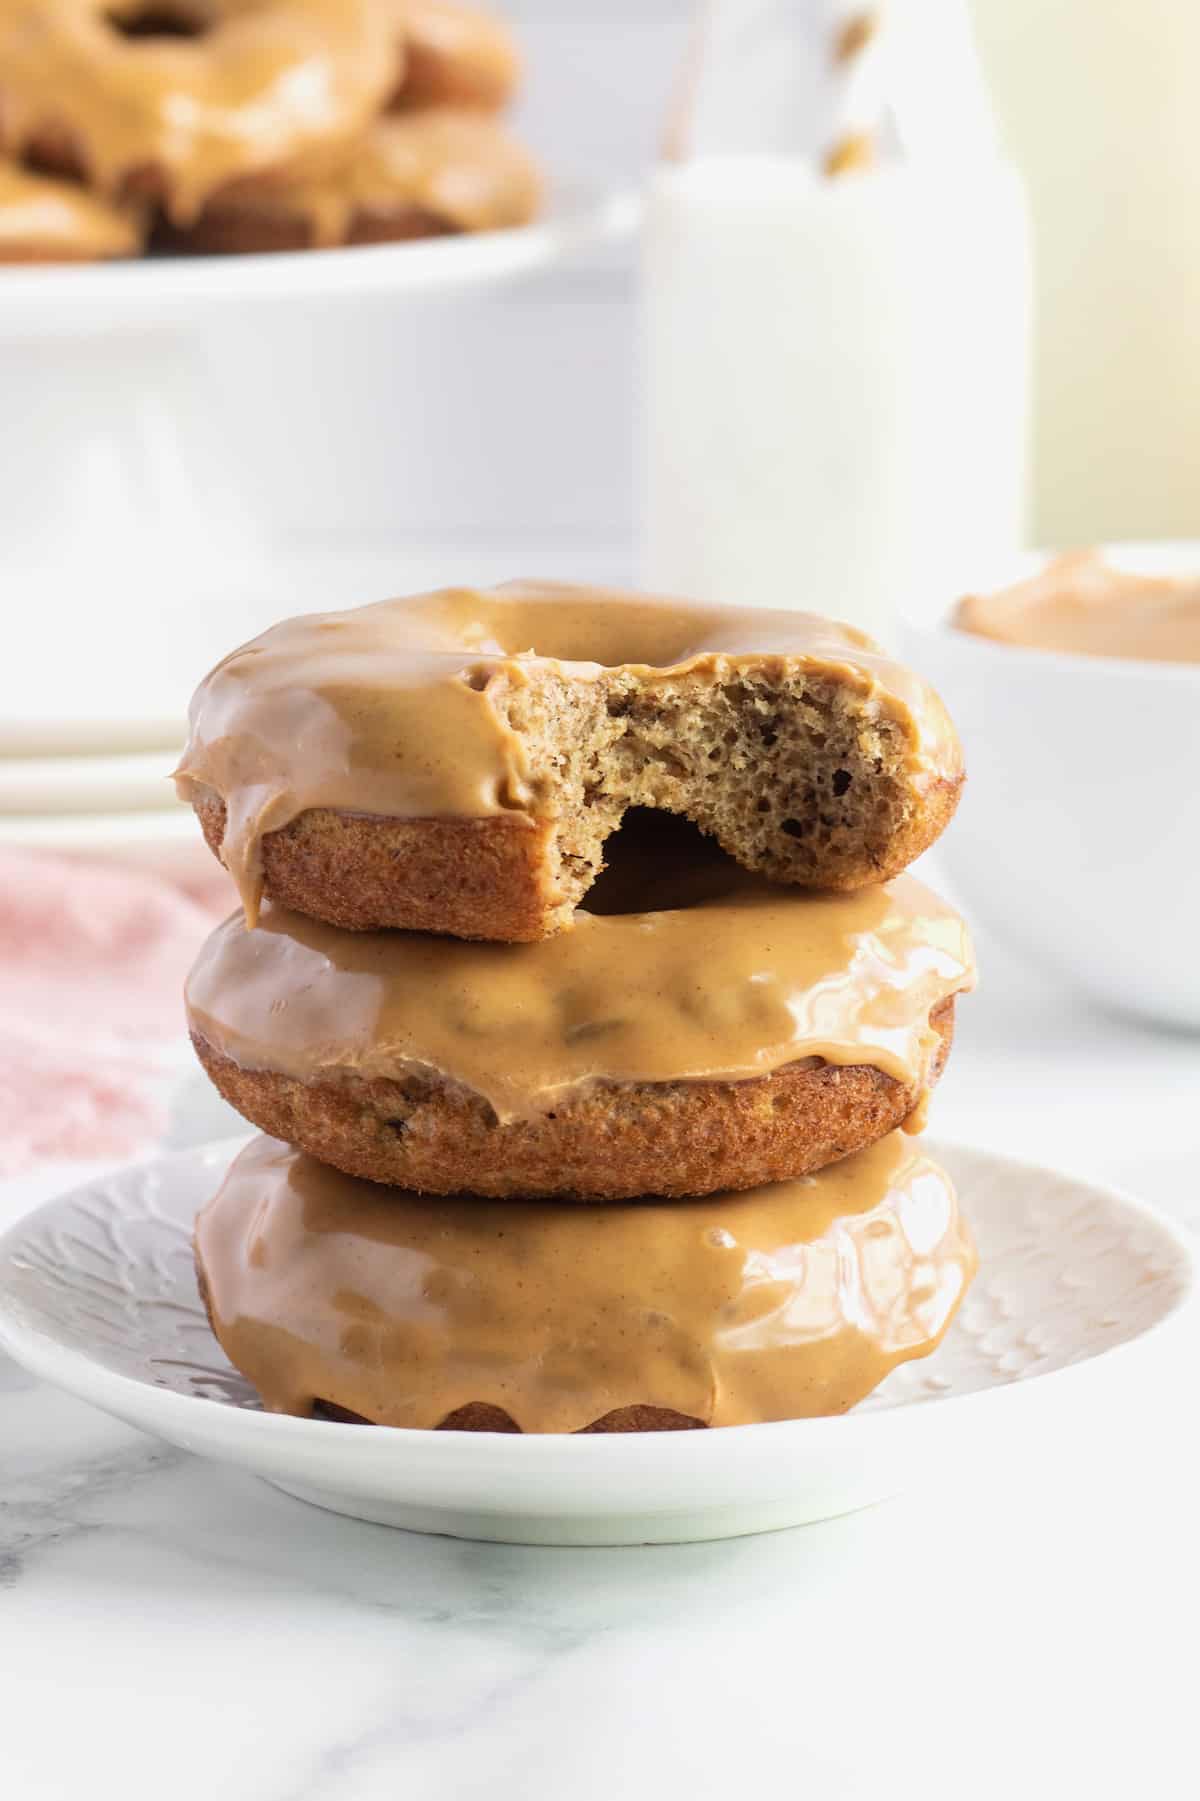 Whole Wheat Baked Banana Donuts with a Peanut Butter Glaze by The BakerMama